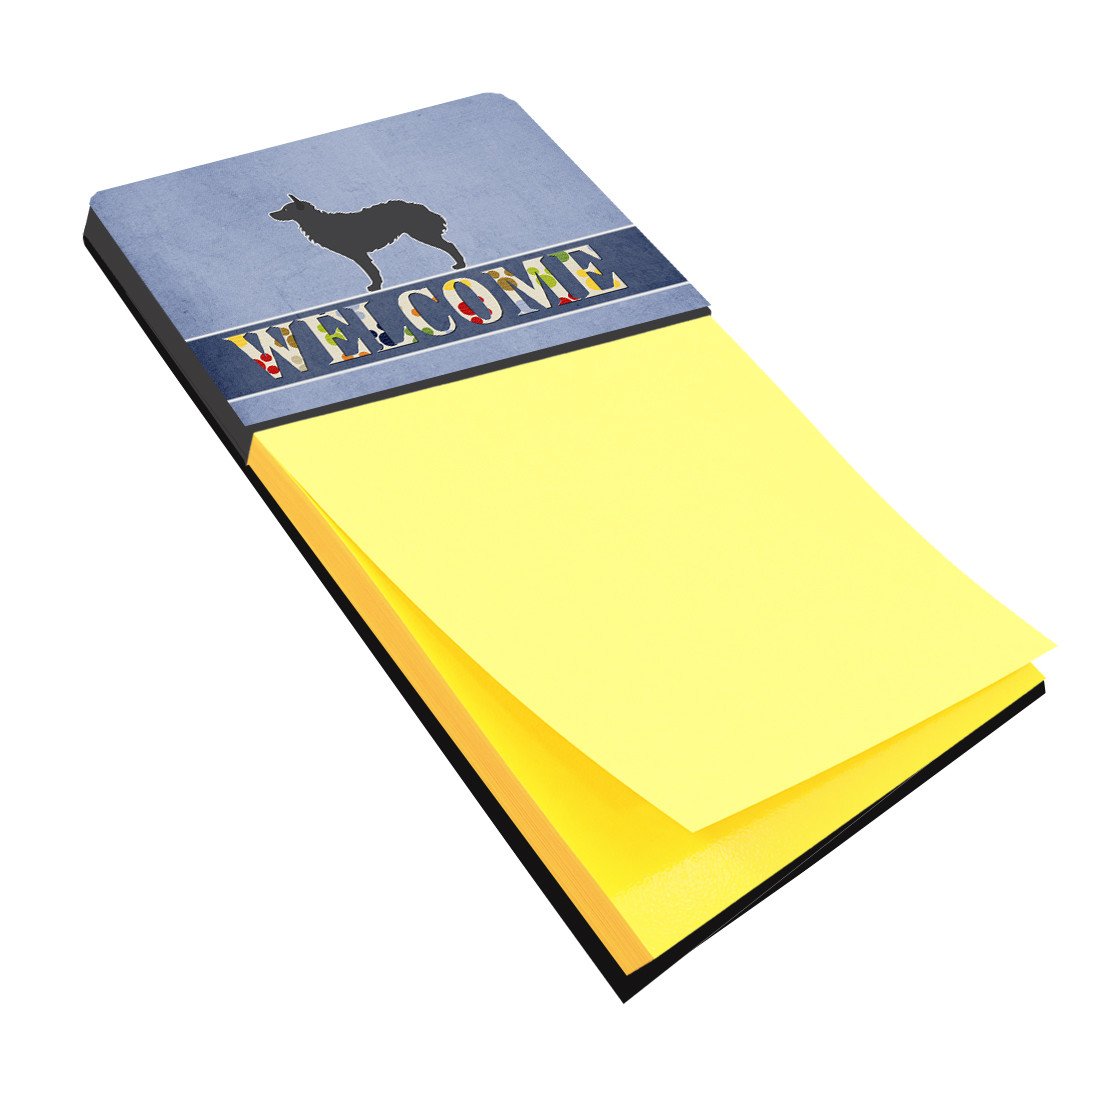 Croatian Sheepdog Welcome Sticky Note Holder BB5525SN by Caroline's Treasures